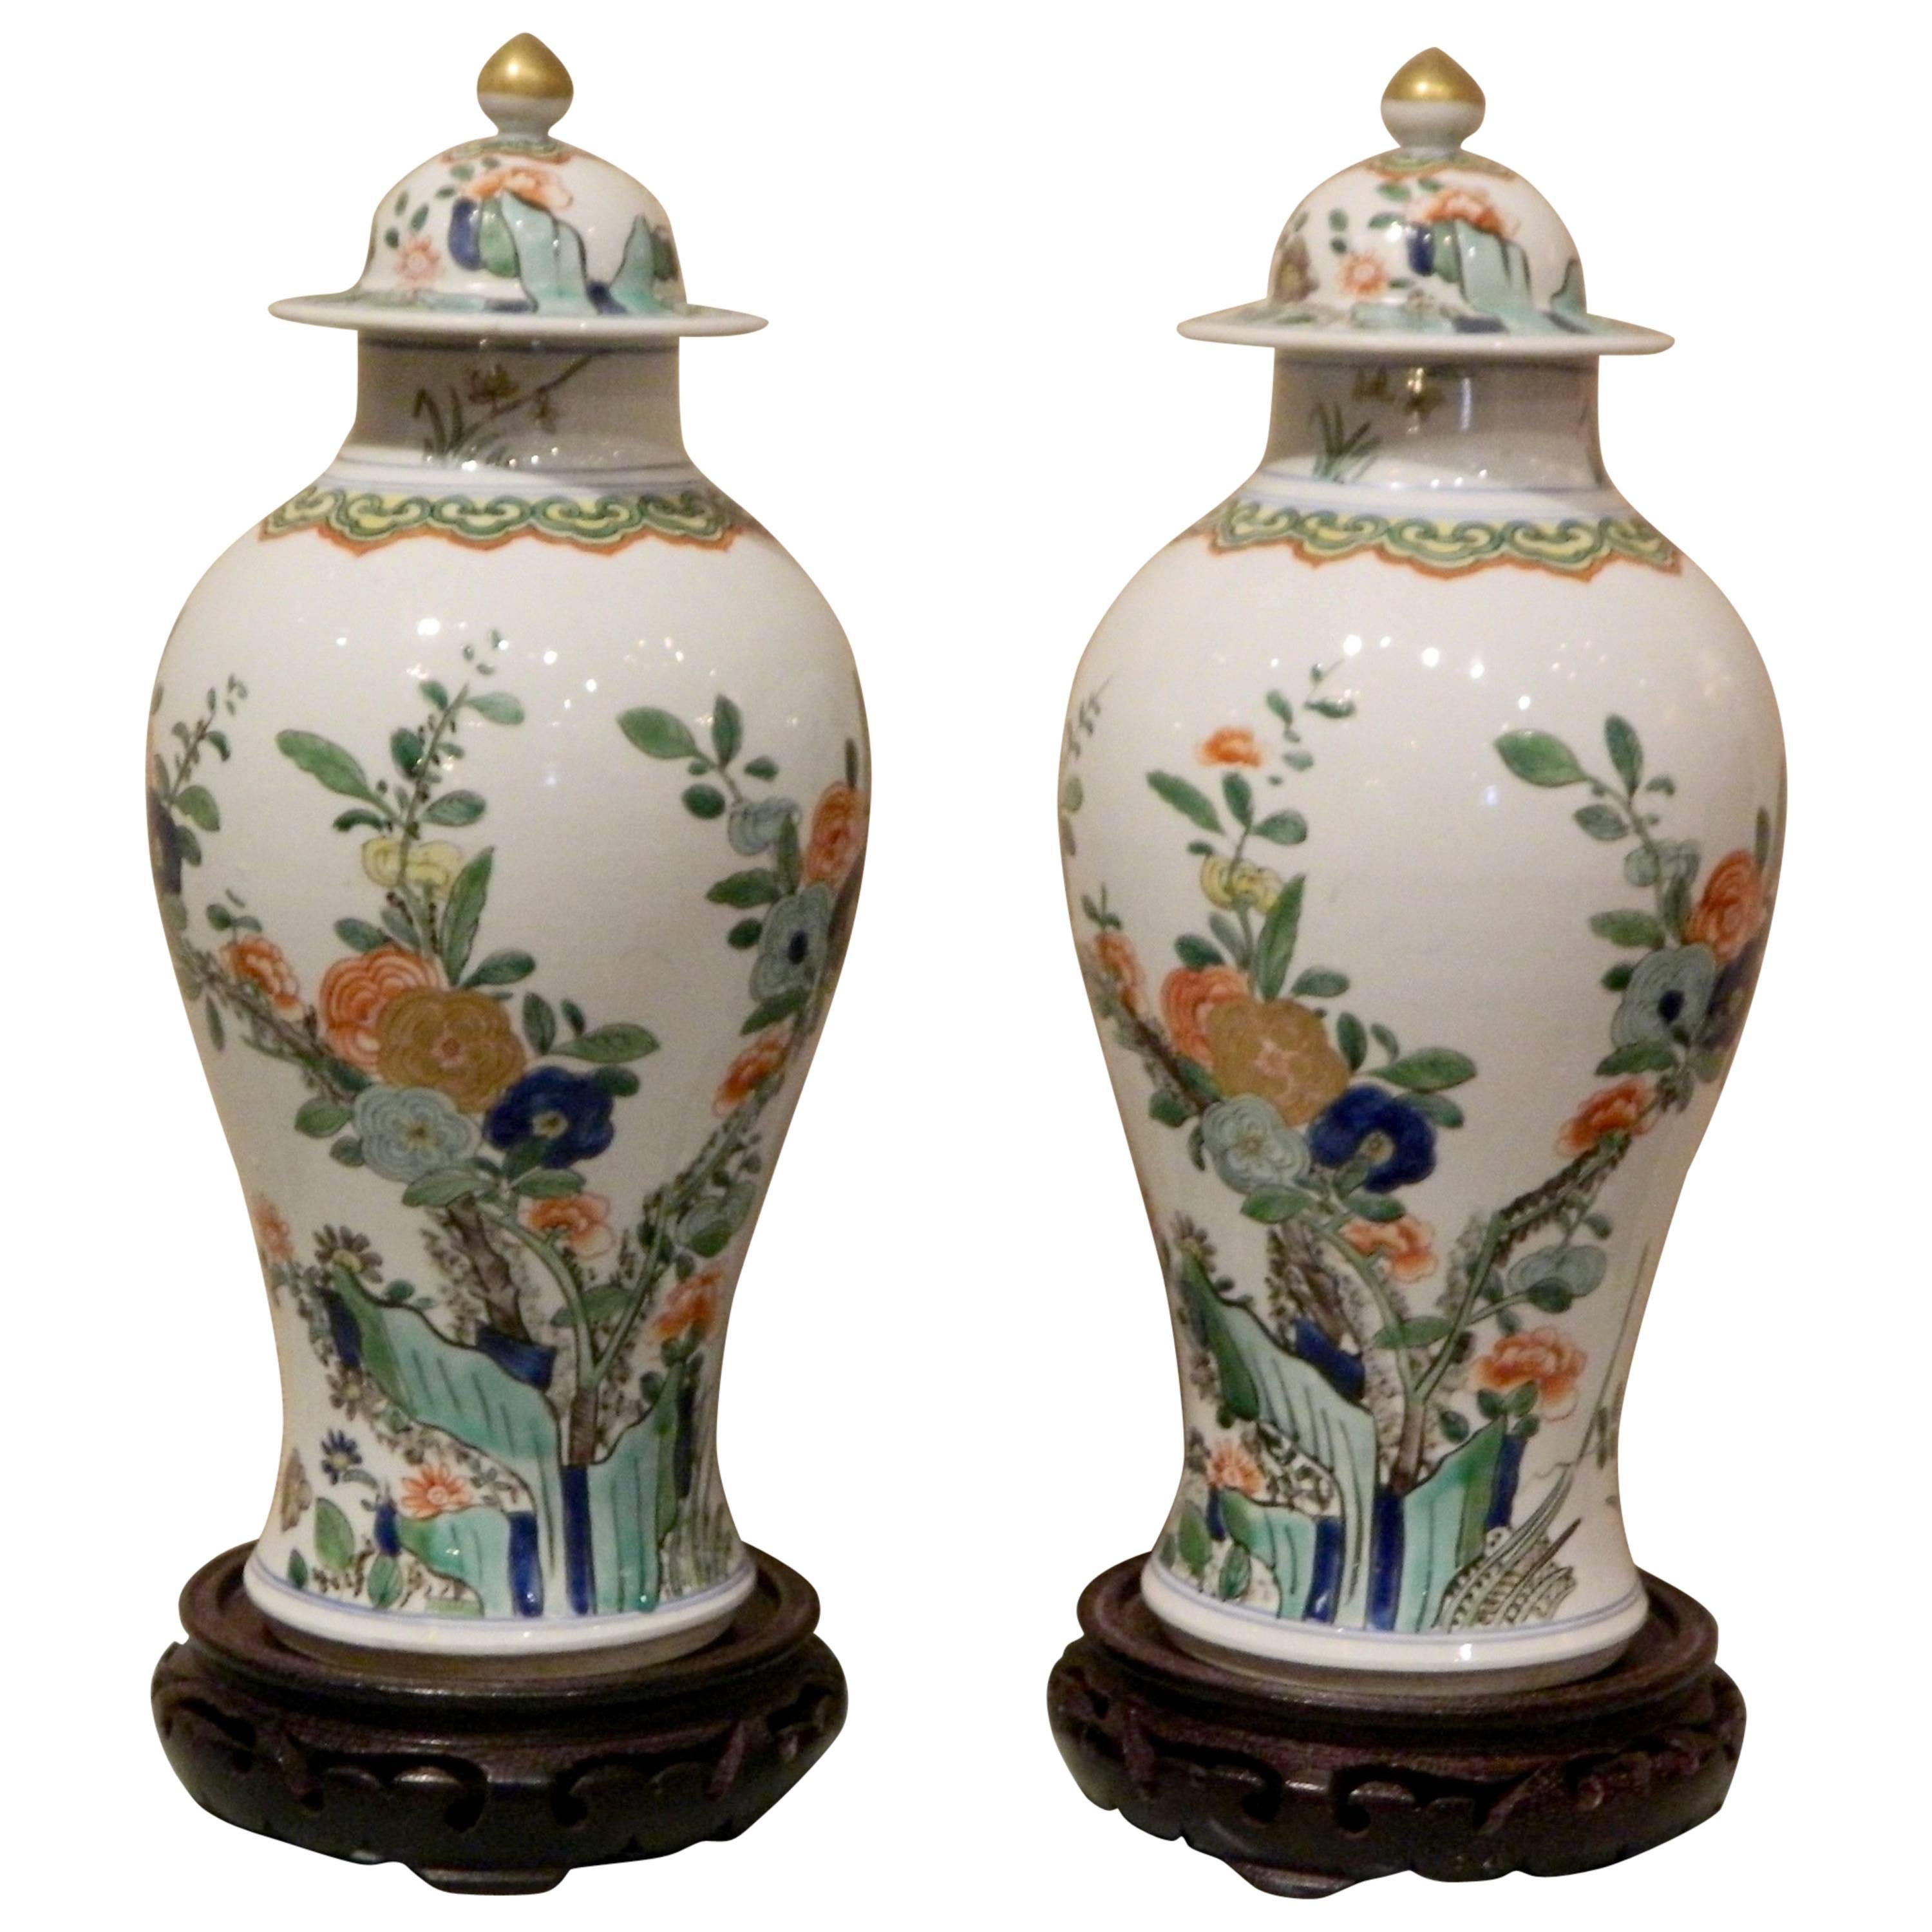 Pair of Chinese Covered Vases with Rosewood Stands, Early 20th Century